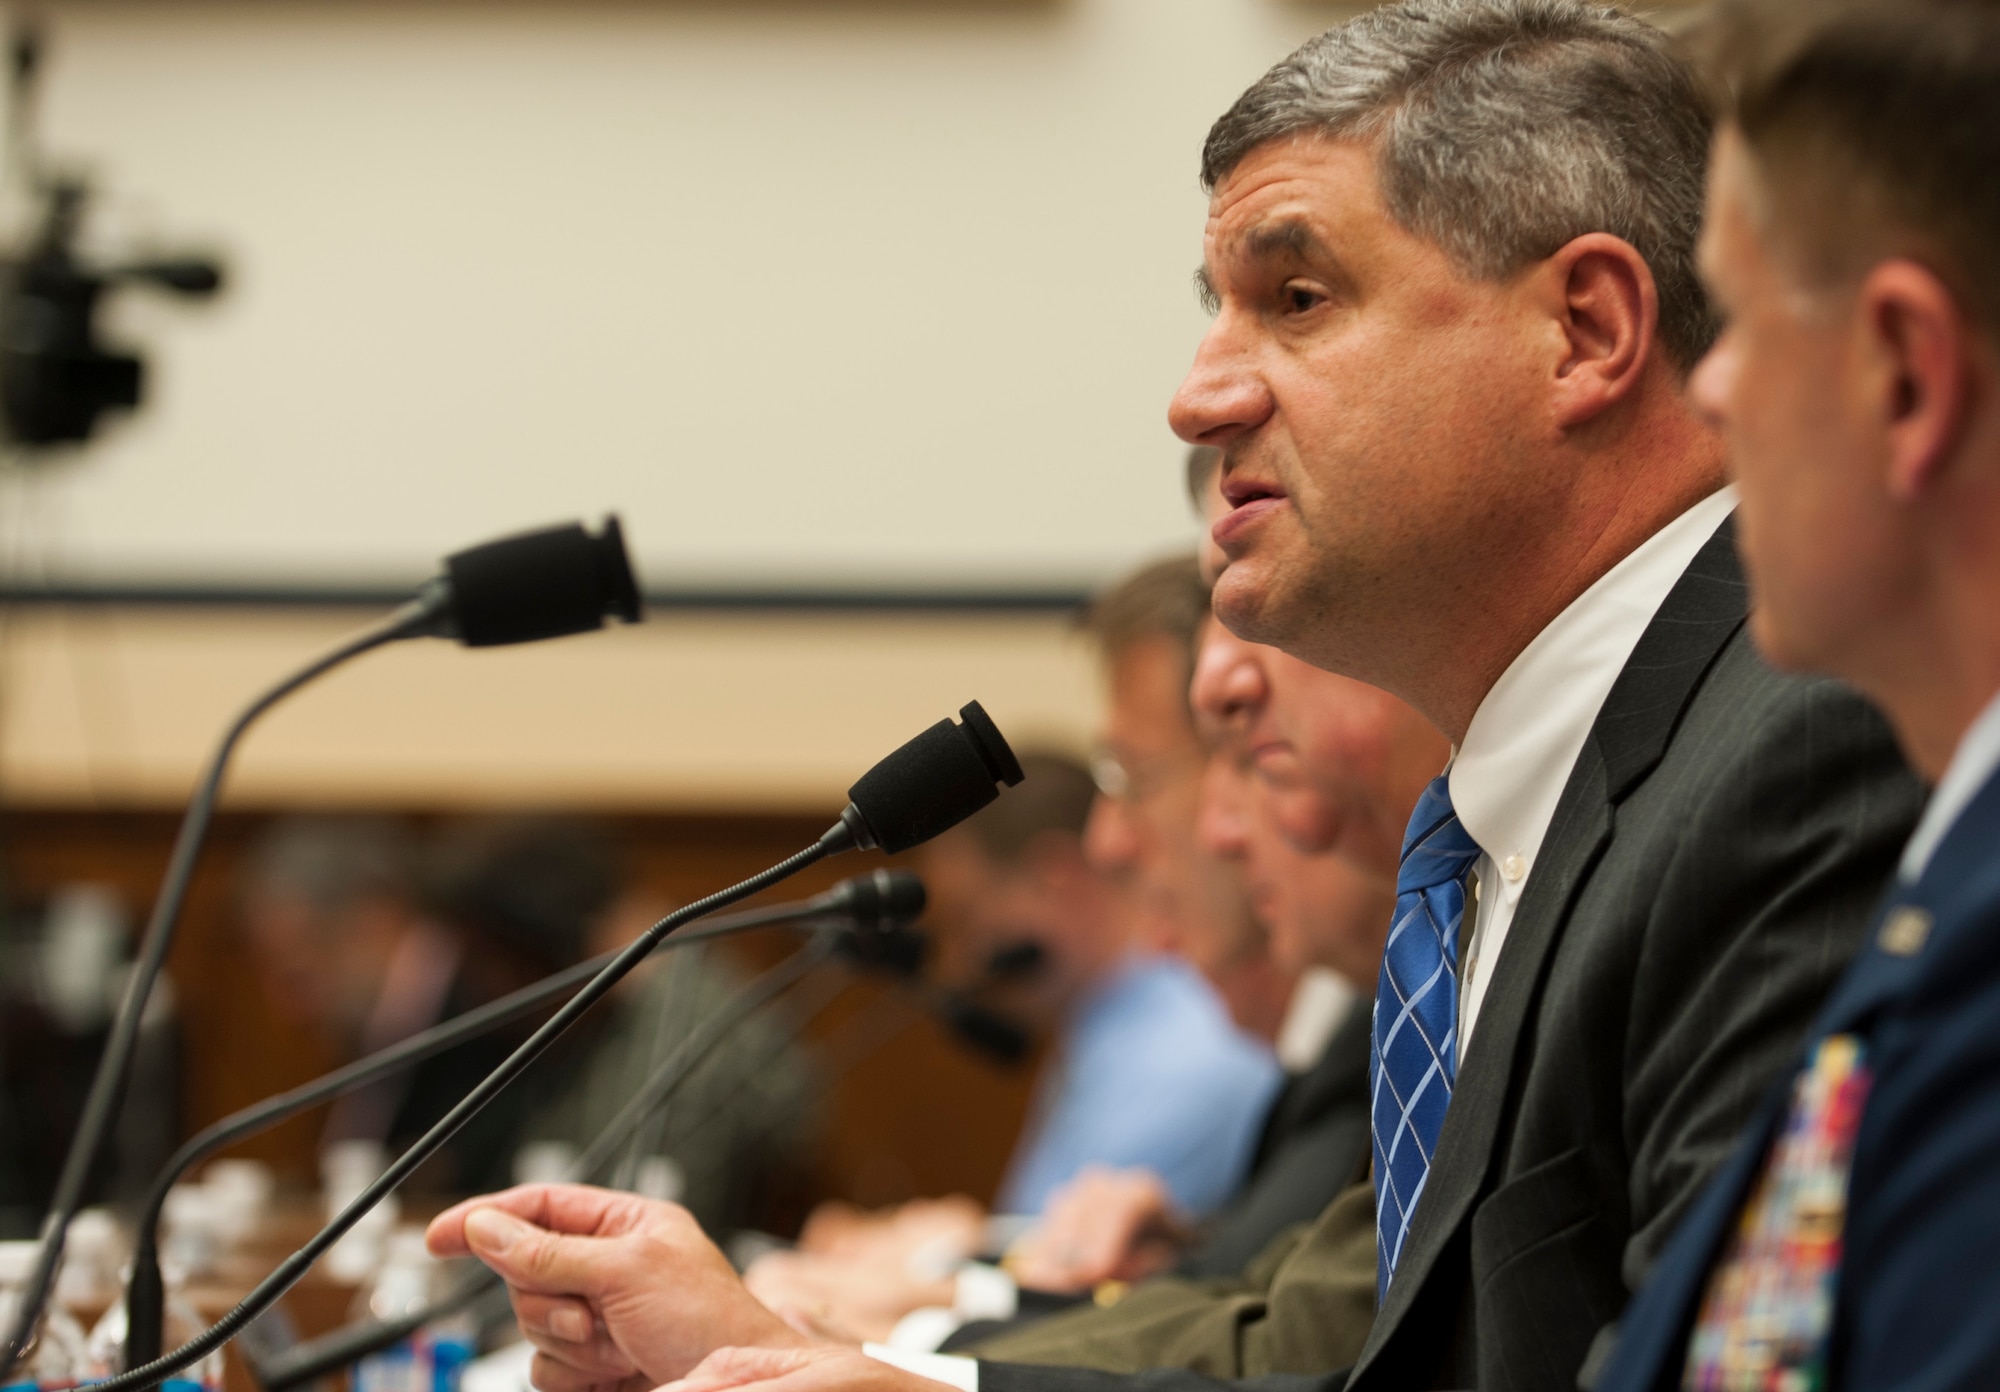 Dr. William LaPlante testifies to the House of Armed Services Committee's subcommittee on Tactical Air and Land Forces about the significant impacts of the continuing resolution and sequestration on the U.S. Air Force Oct. 23, 2013, in Washington, D.C. LaPlante is the principle deputy to the secretary of the Air Force for acquisition.